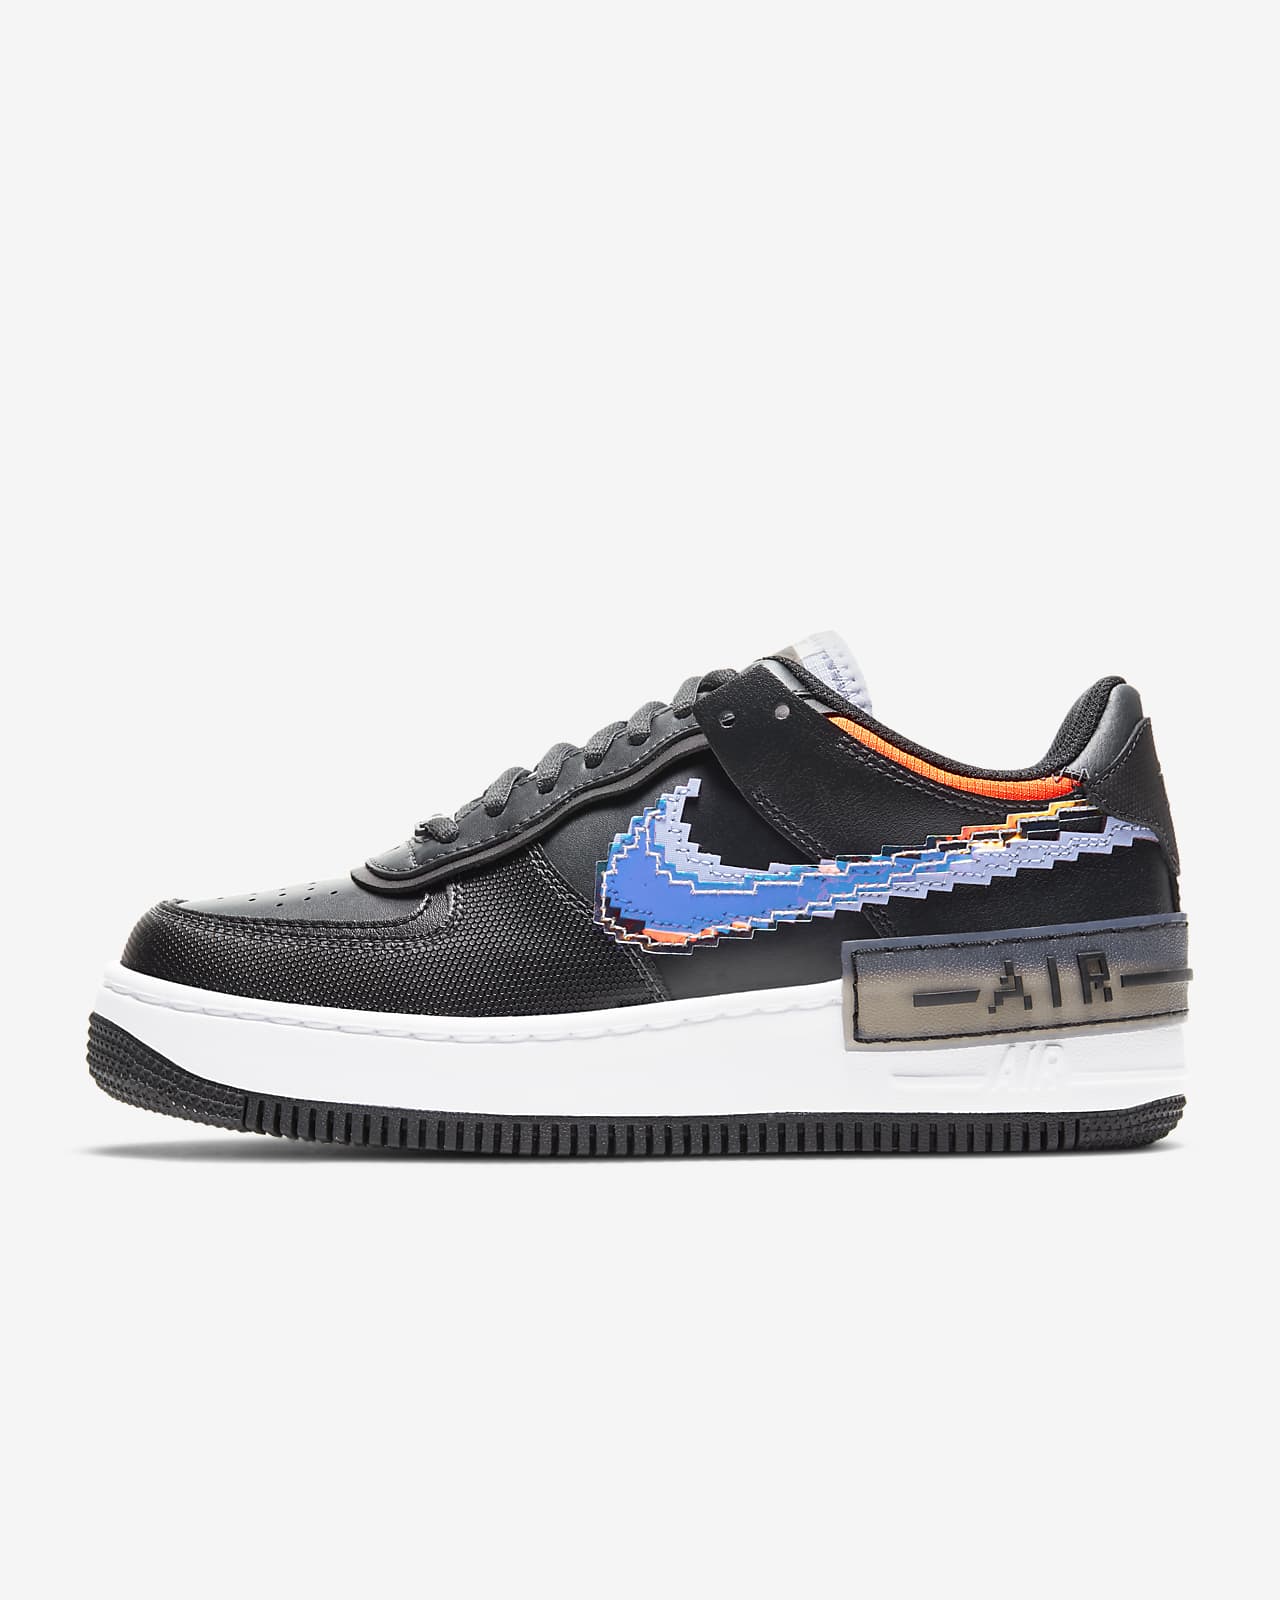 Nike Air Force 1 Shadow SE Women's Shoes